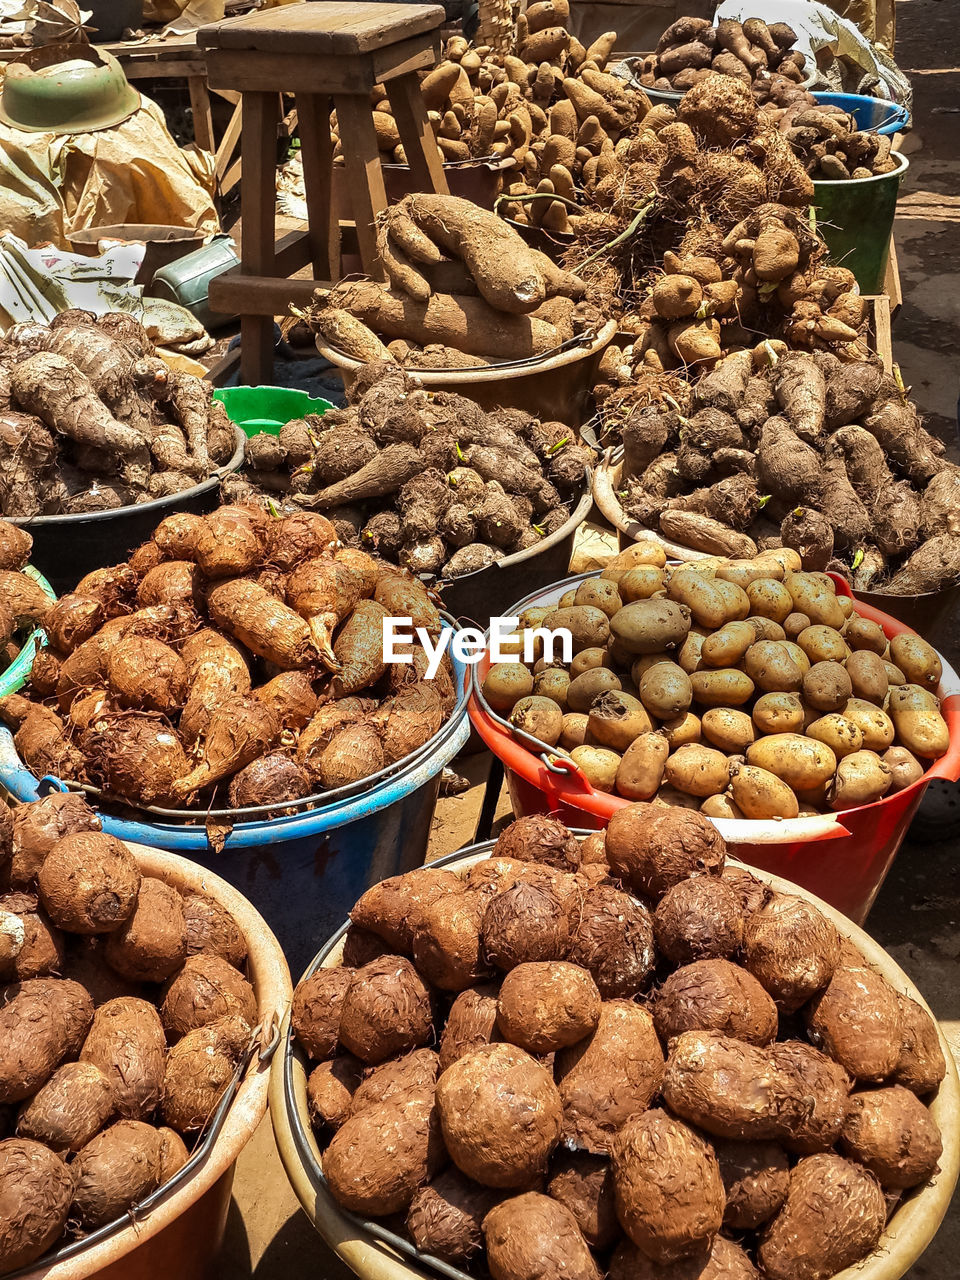 Close-up of potatoes and other root vegetables for sale at market stall, bamenda, cameroon